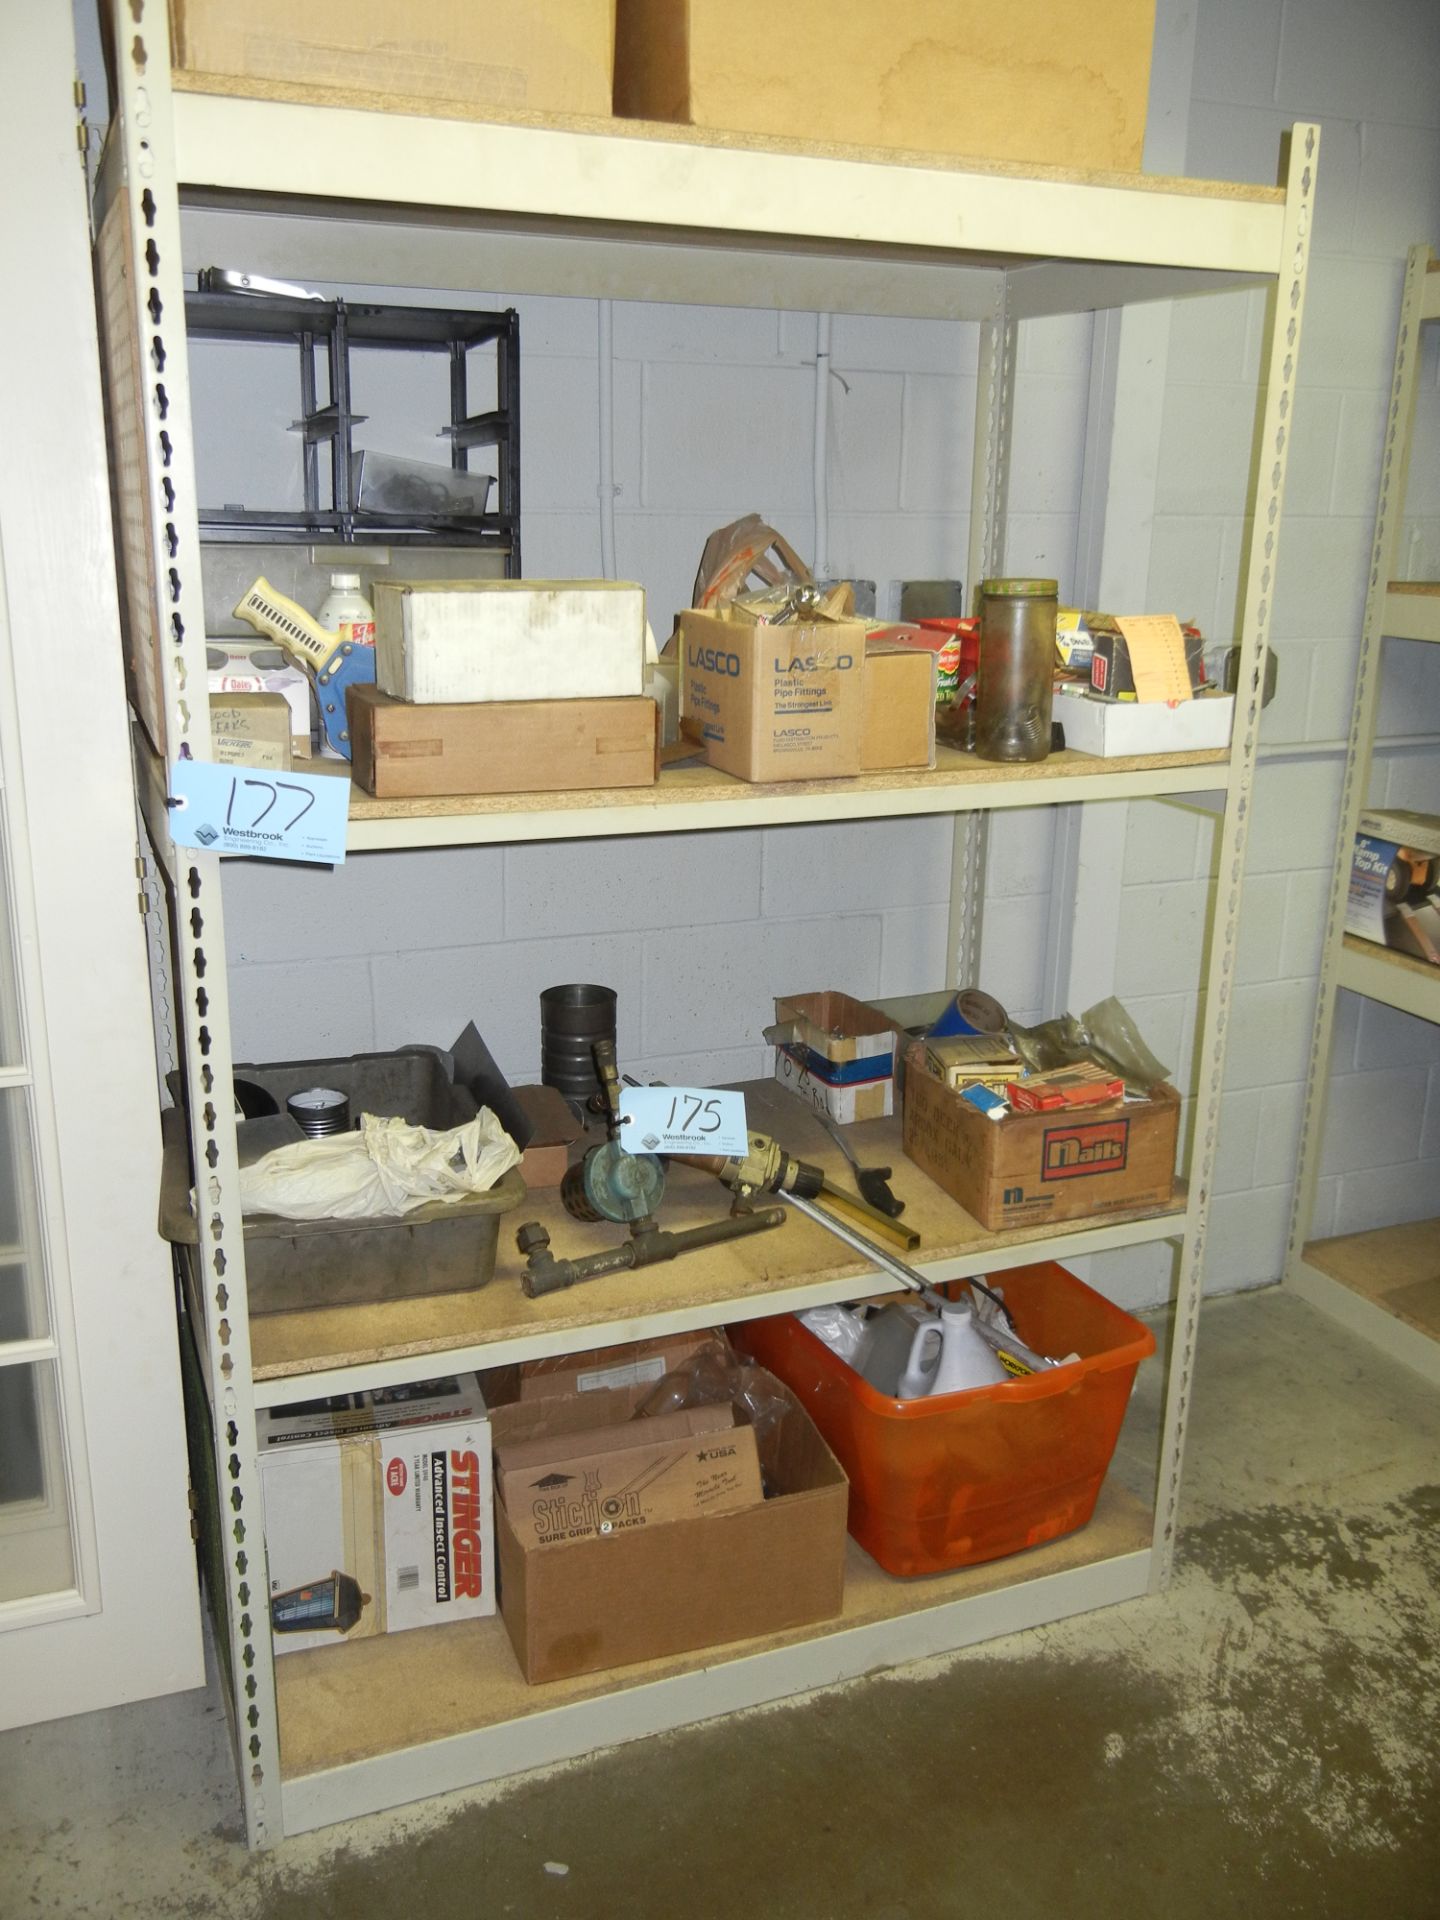 Lot-(5) Sections Shelving (Contents Not Included), (Not to be Removed Until Empty) - Image 2 of 3